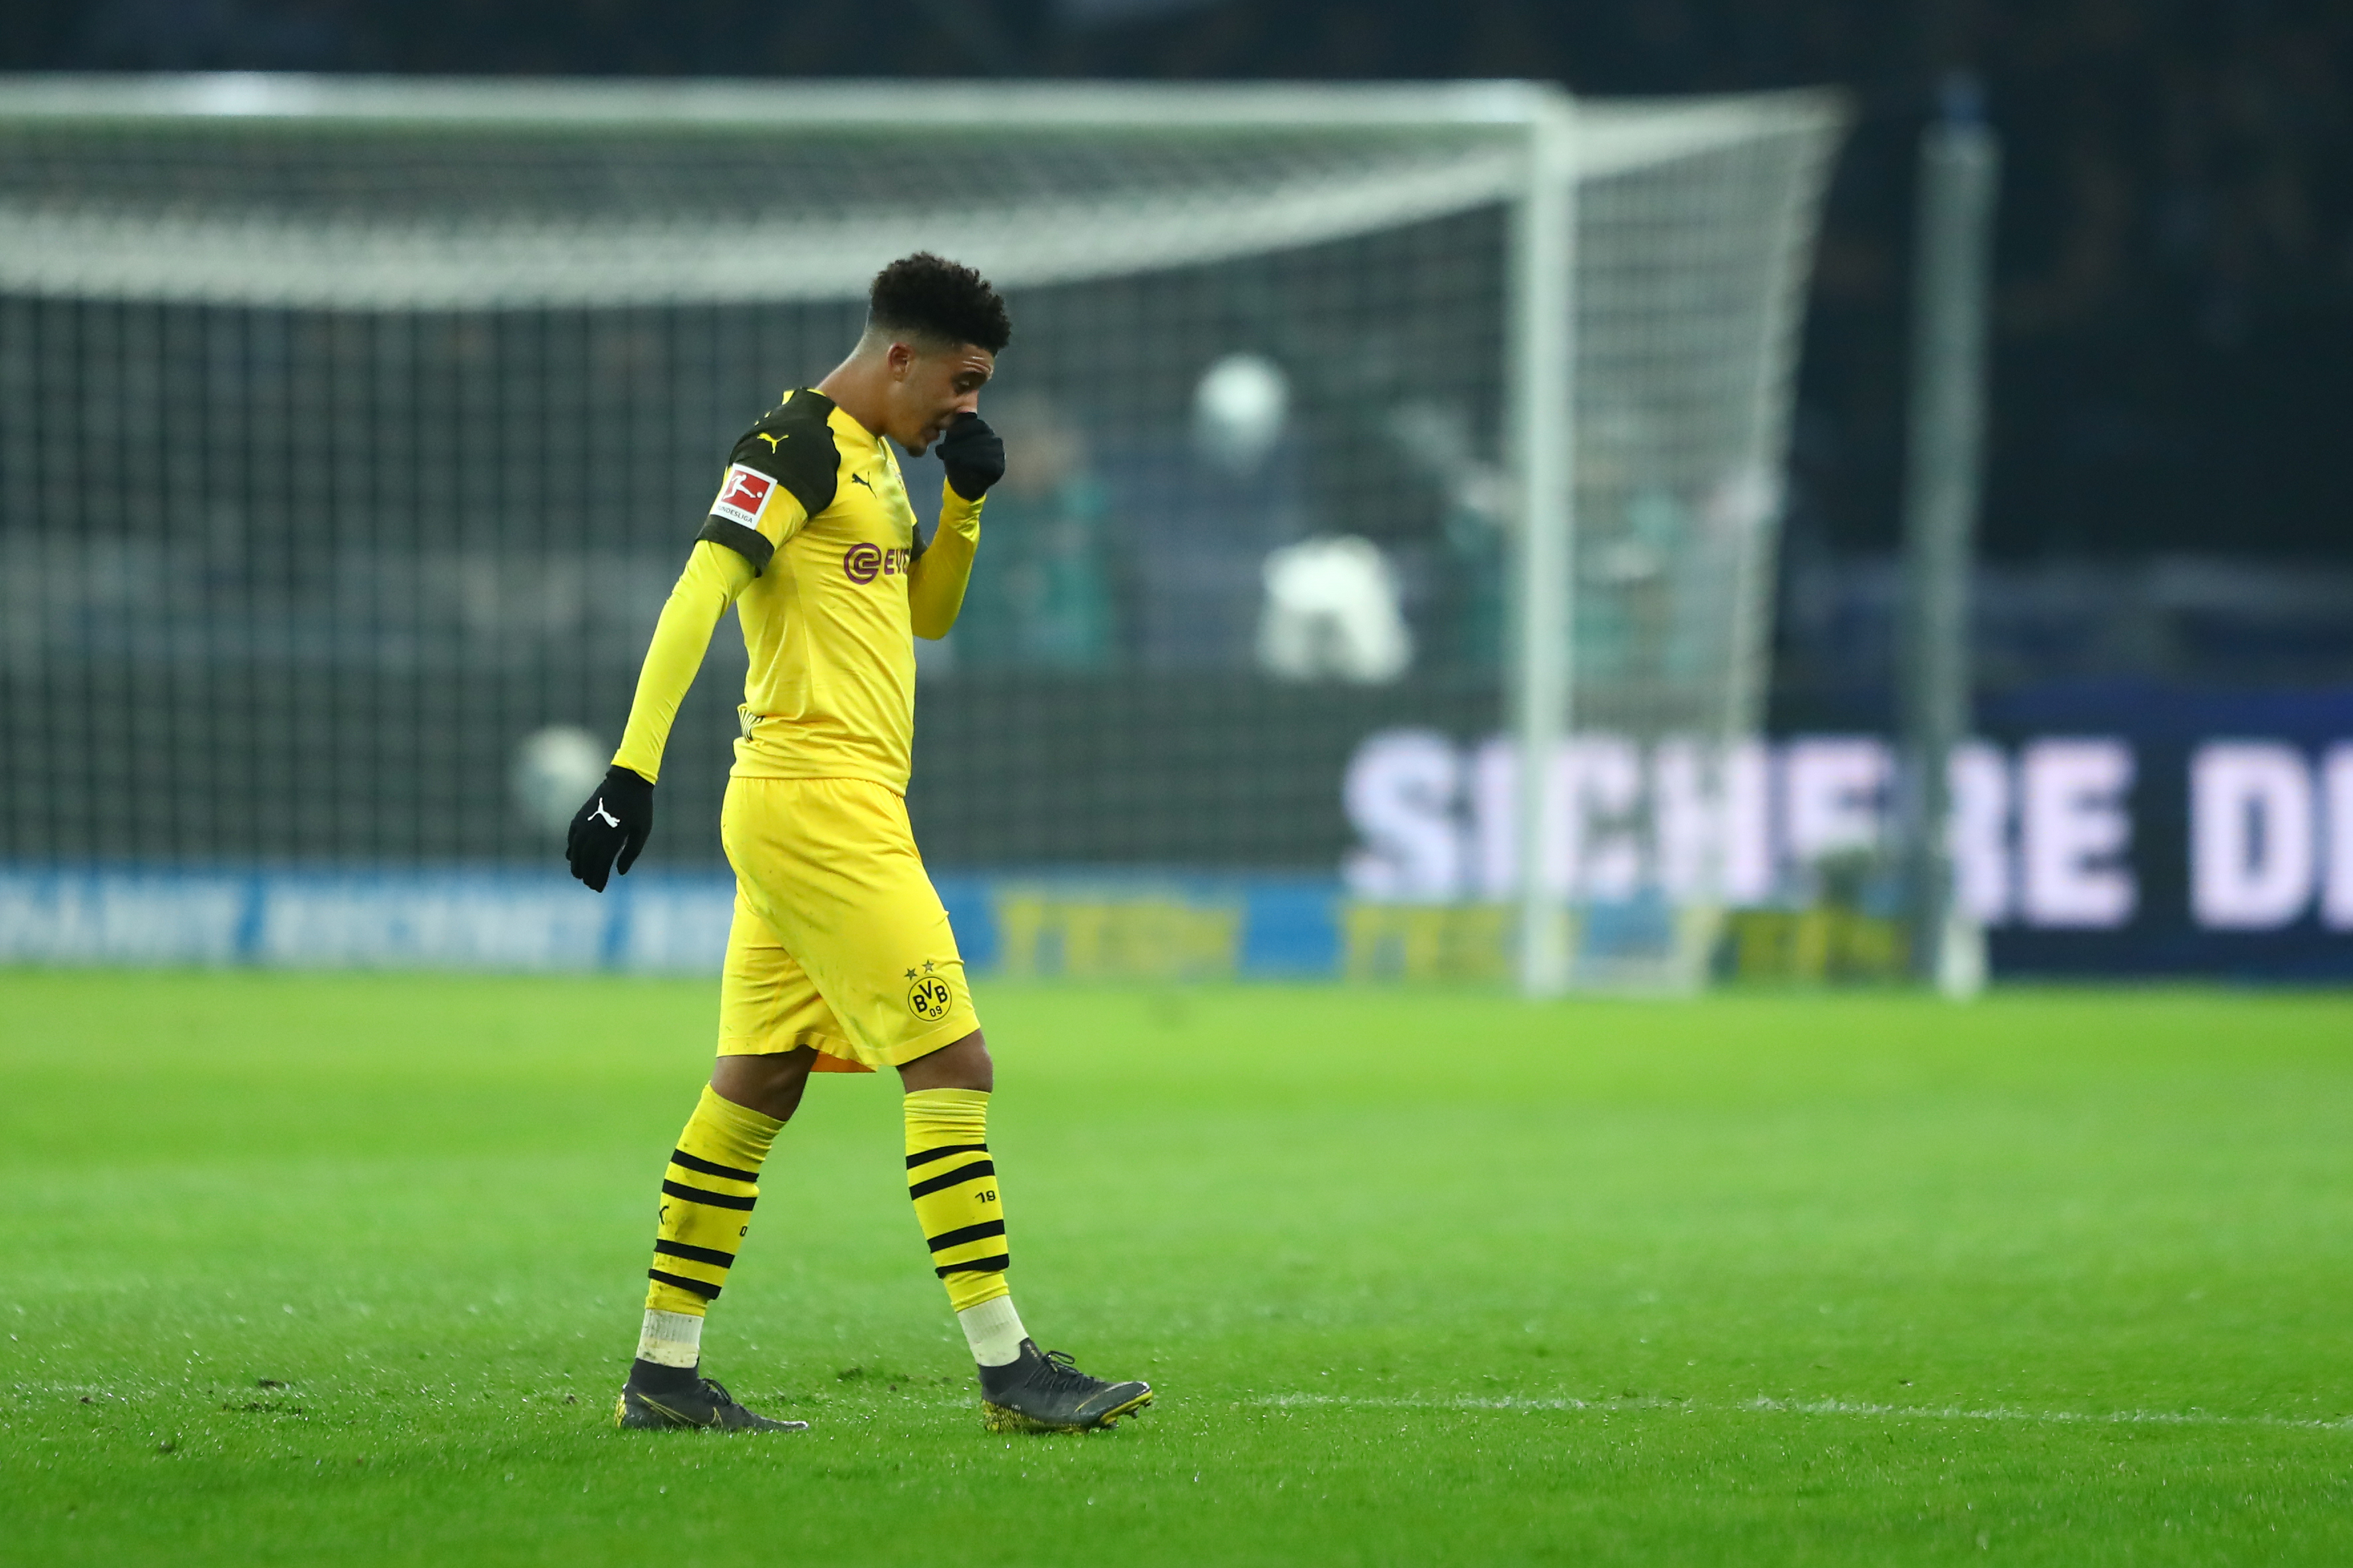 BERLIN, GERMANY - MARCH 16: Jadon Sancho of Borussia Dortmund looks dejected during the Bundesliga match between Hertha BSC and Borussia Dortmund at Olympiastadion on March 16, 2019 in Berlin, Germany. (Photo by Martin Rose/Bongarts/Getty Images)